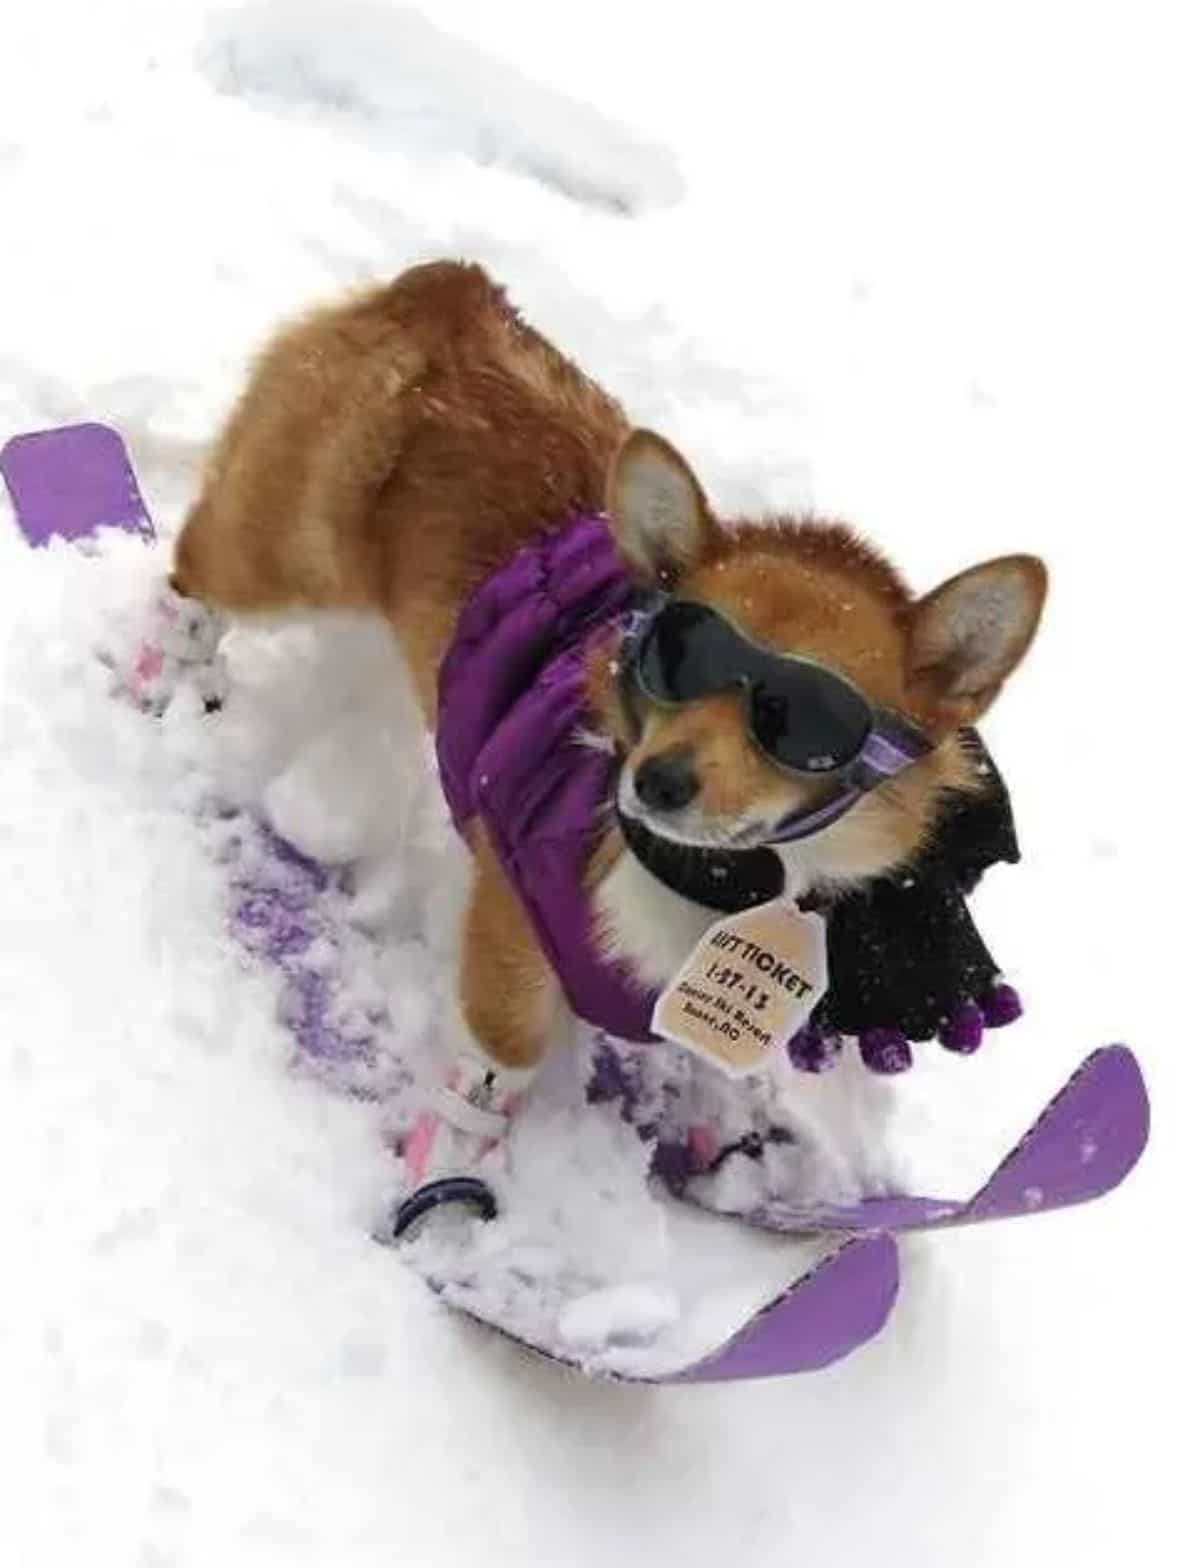 brown and white dog in black goggles and purple and black jacket with purple skis standing in snow